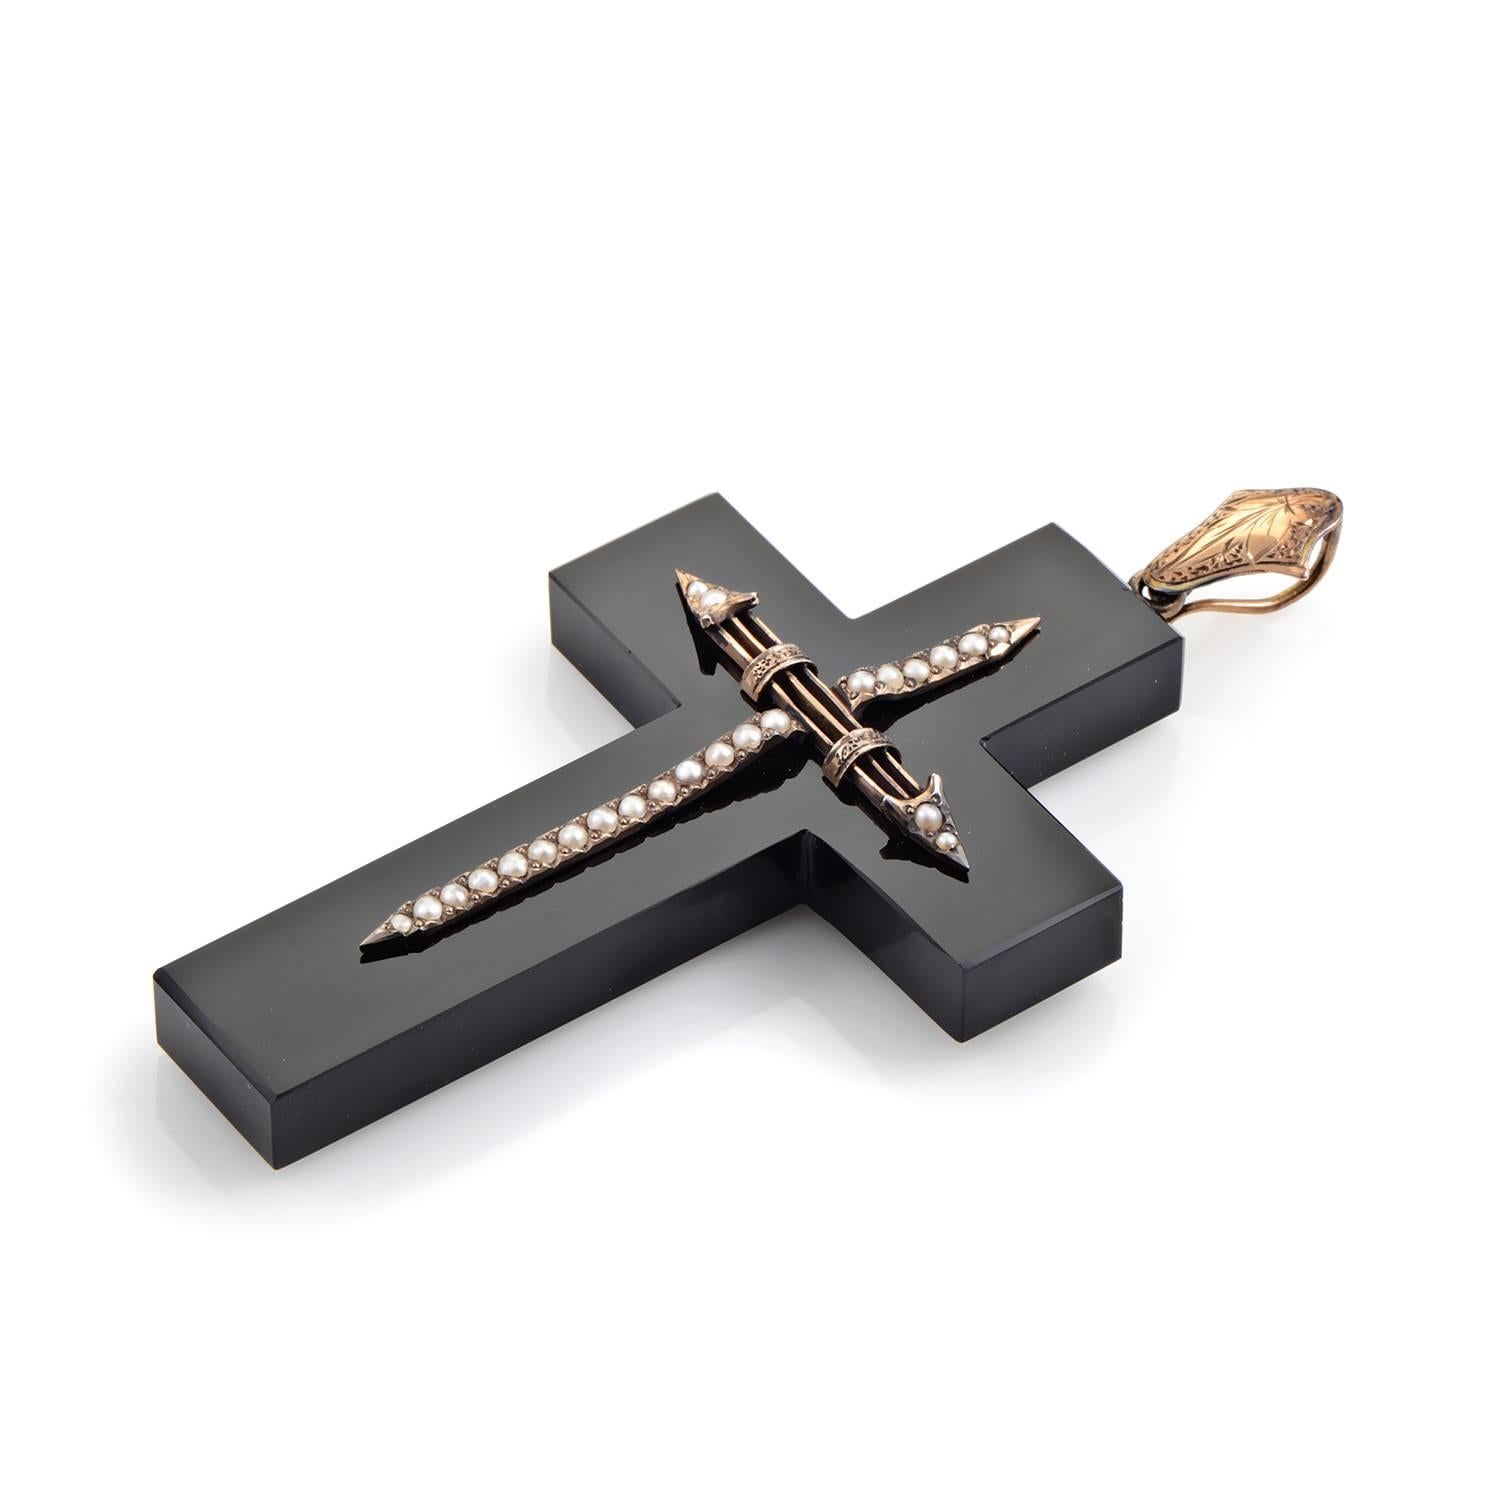 This breathtaking religious pendant is perfect for somebody who enjoys bold fashion statements. The pendant is made of black onyx and is accented with 14K rose gold. Lastly, petite pearls add a dazzling touch to the overall design.